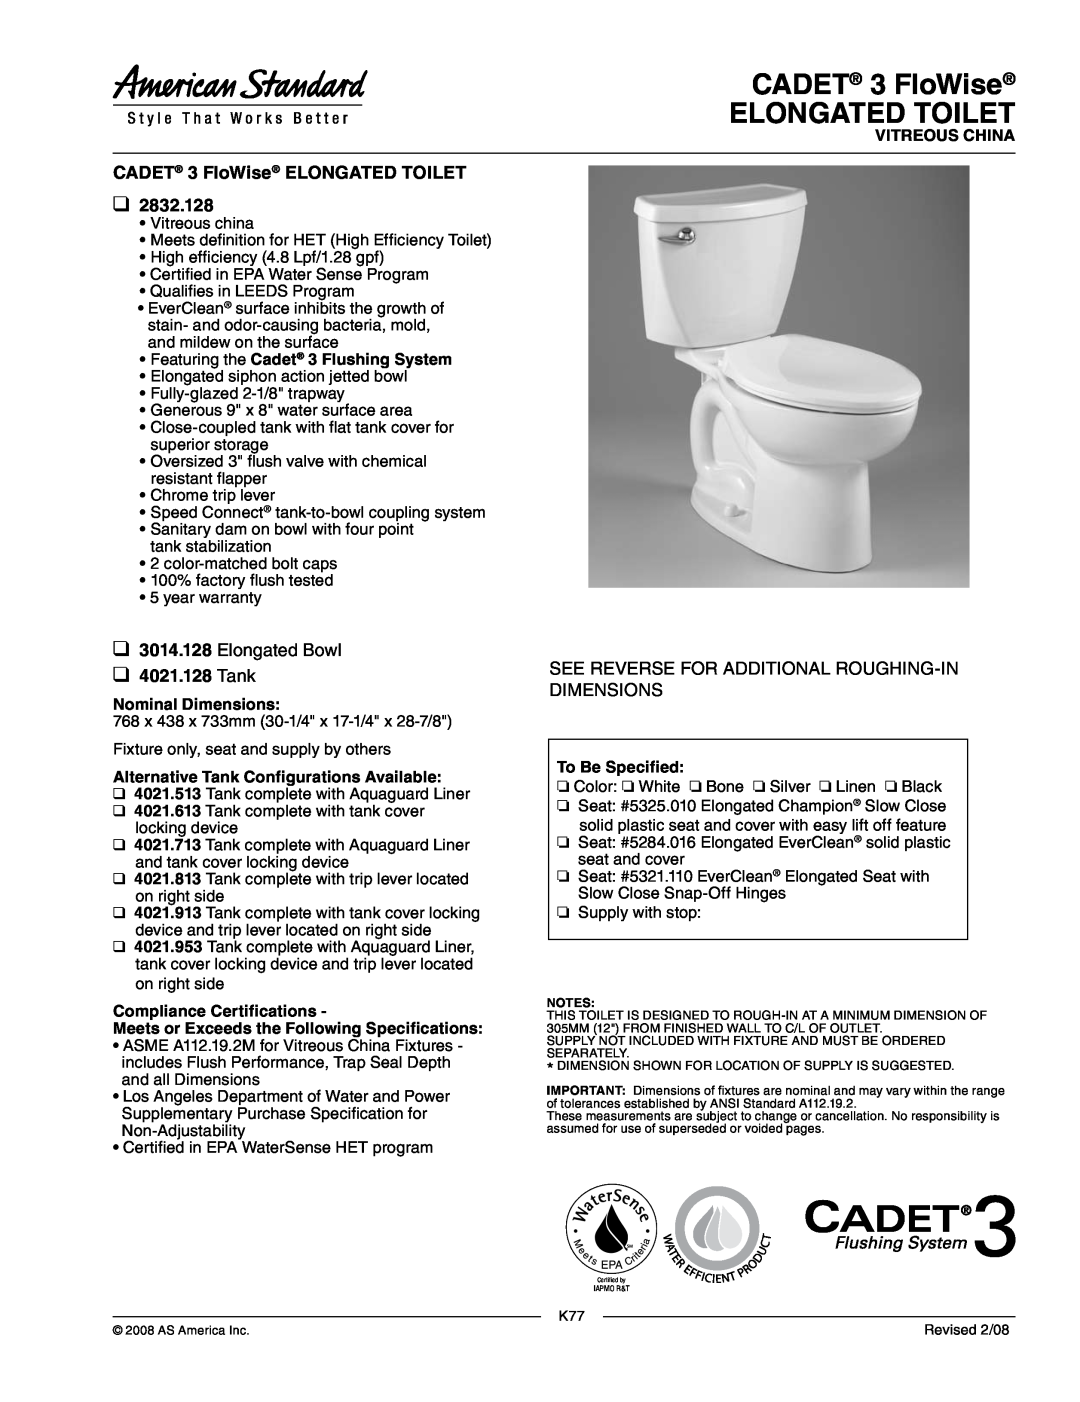 American Standard 4021.513 dimensions CADET 3 FloWise ELONGATED TOILET, Vitreous China, Nominal Dimensions, Elongated Bowl 